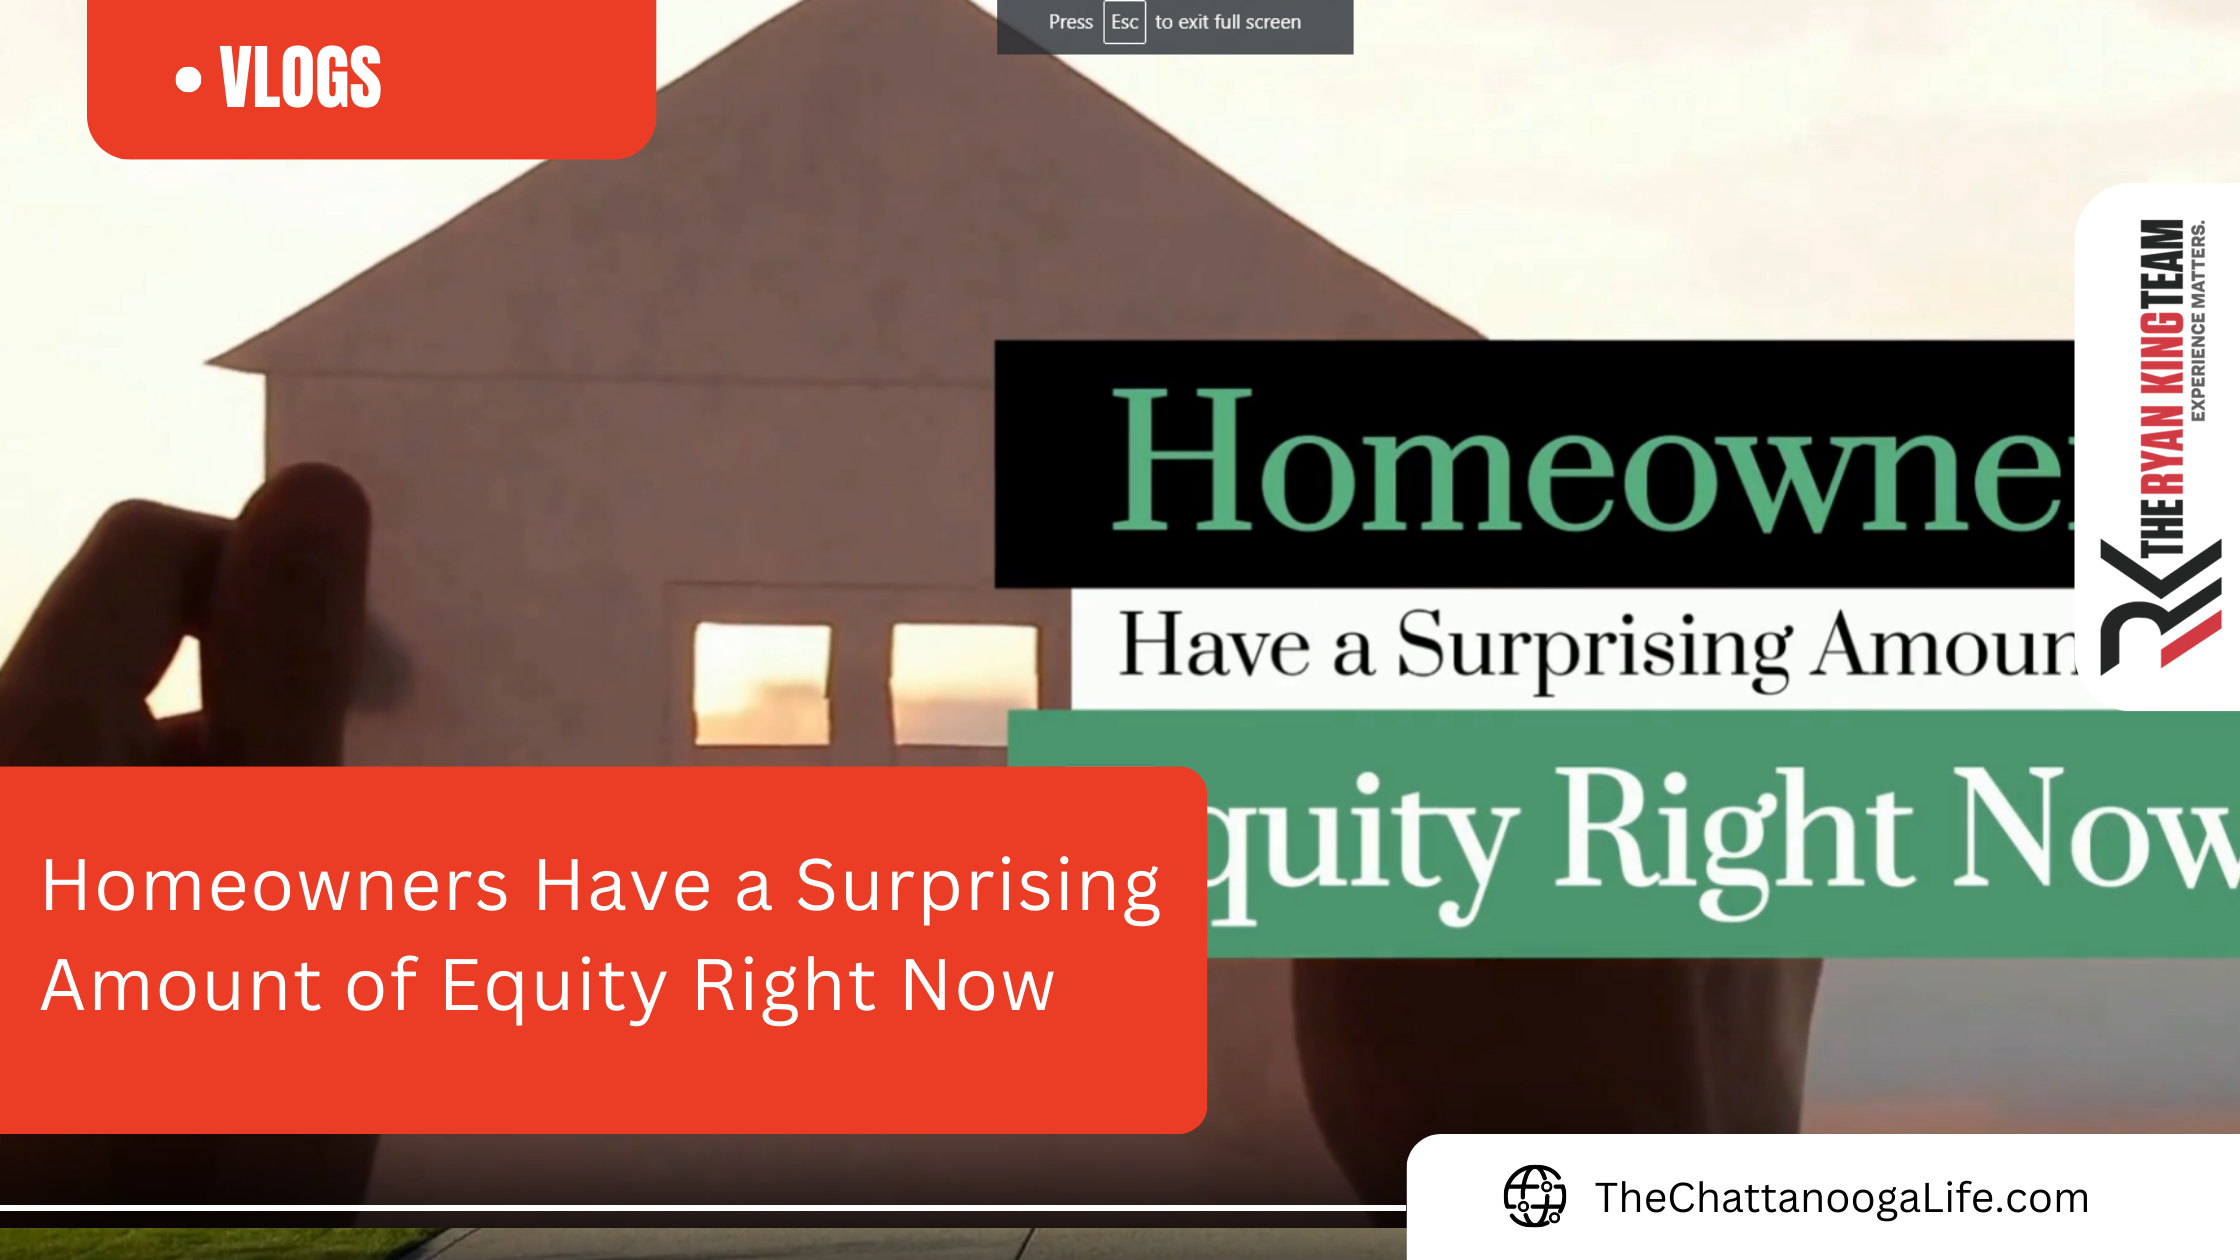 Homeowners Have a Surprising Amount of Equity Right Now